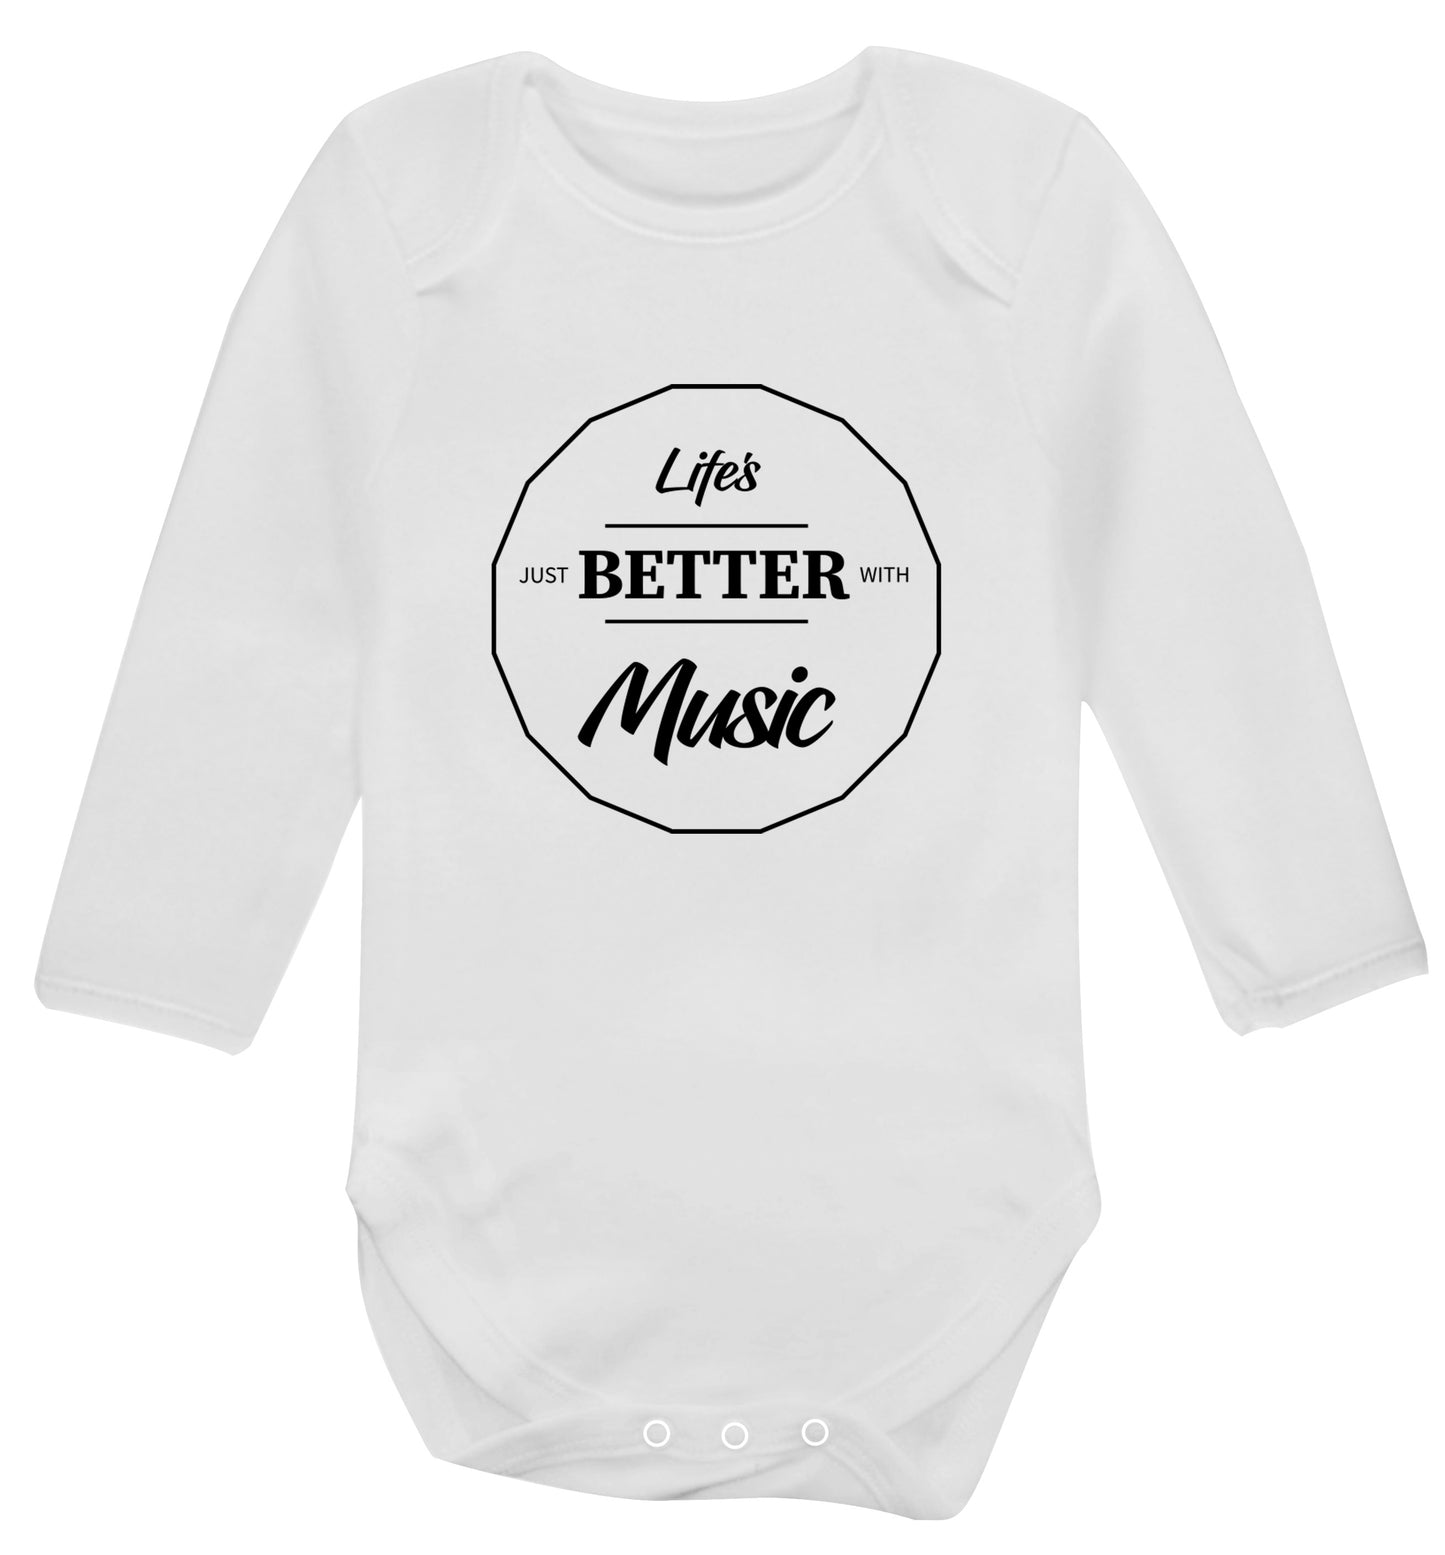 Life is Better With Music Baby Vest long sleeved white 6-12 months